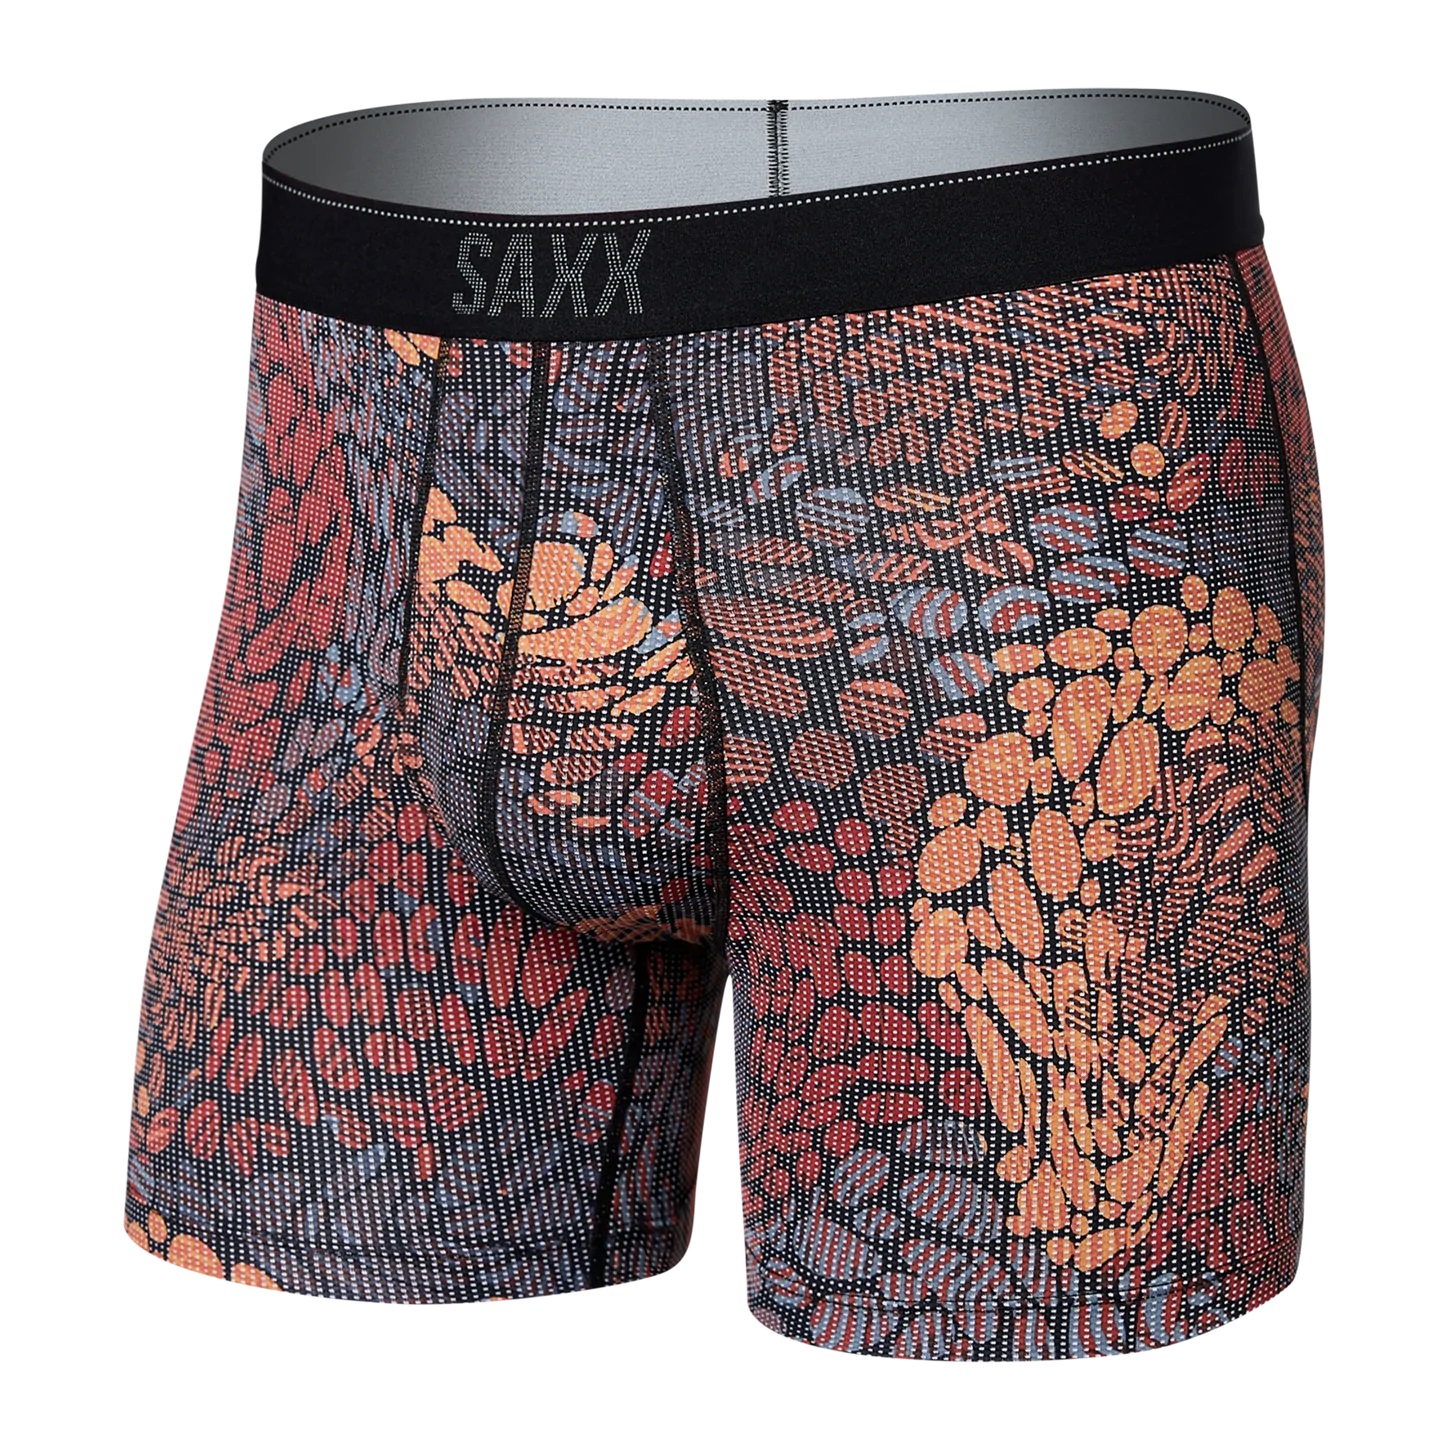 Saxx Men's Vibe Boxer Brief- Balls To The Wall-Black - Andy